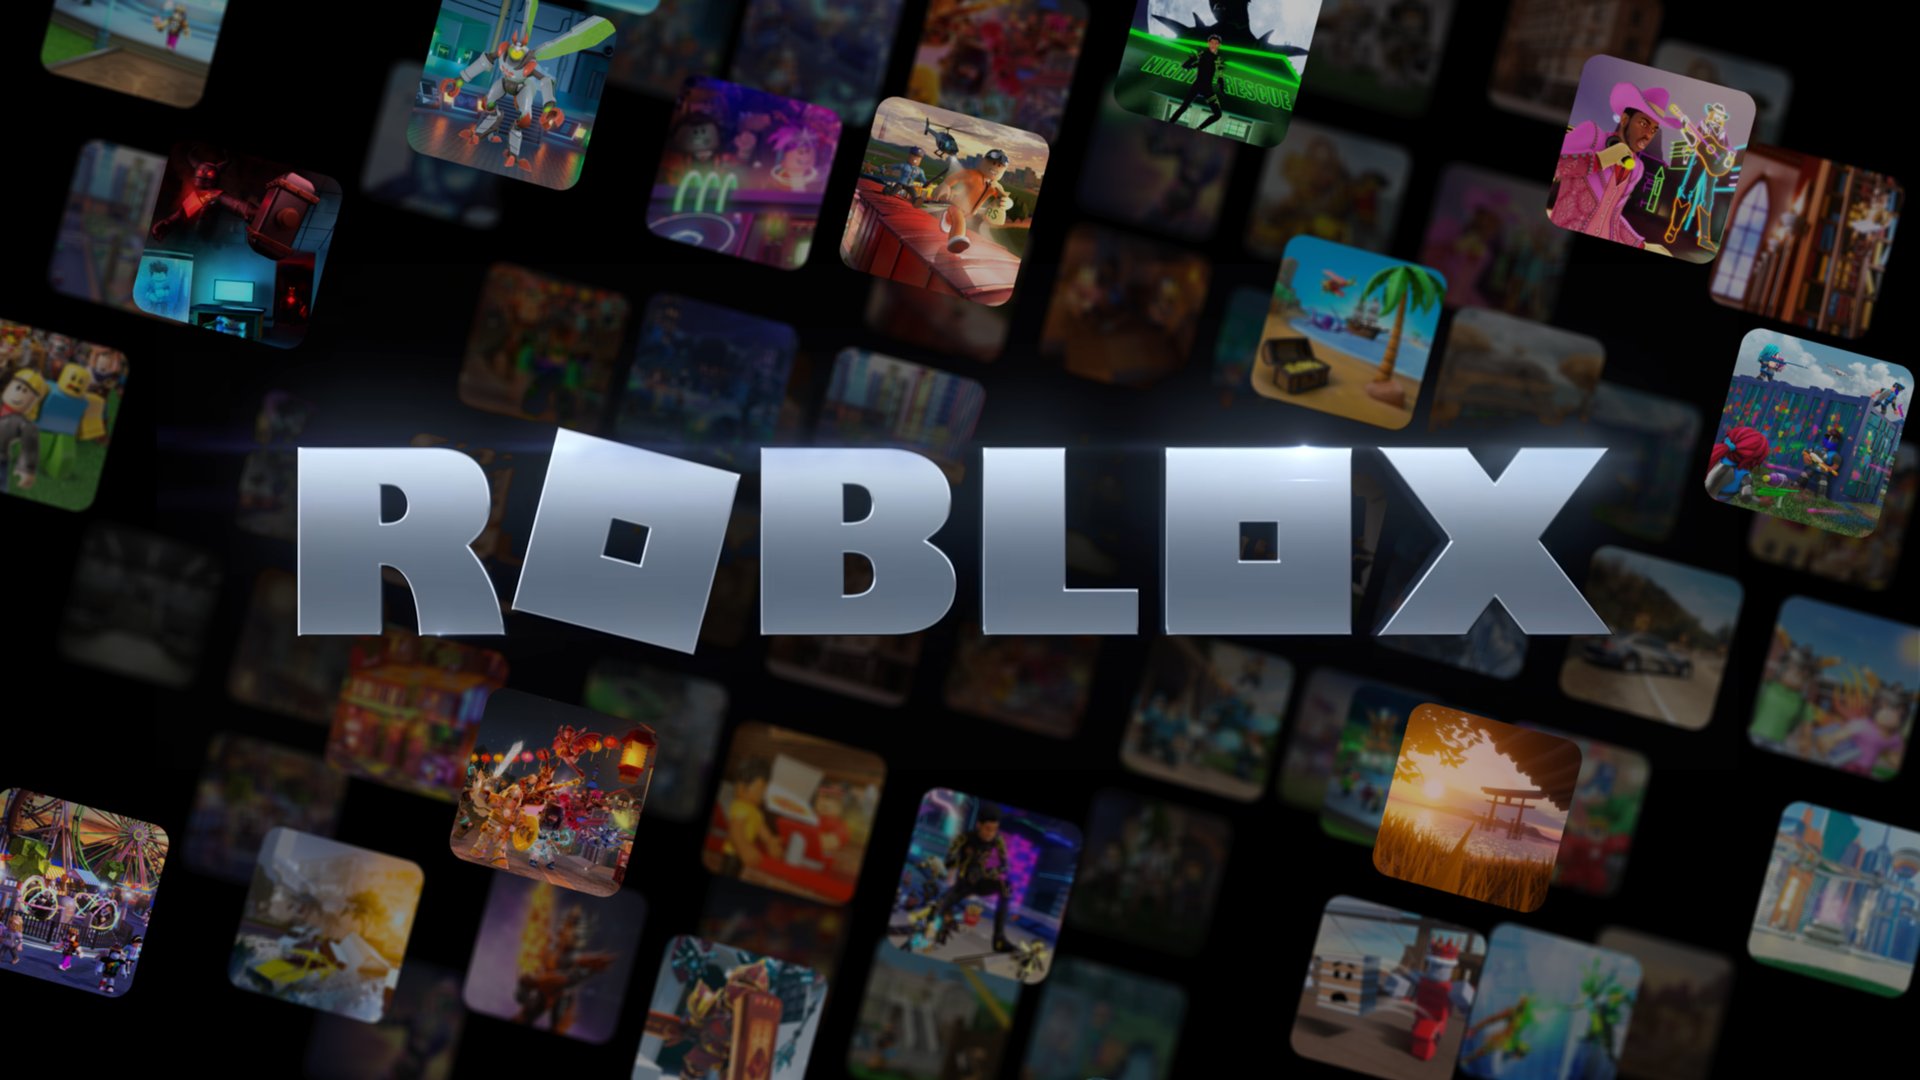 Bloxy News IN: Roblox Corporation (NYSE: $RBLX) has released their Fourth Quarter 2021 Financial Highlights, Full Fiscal Year 2021 Financial Highlights, and January 2022 Key Metric Estimates